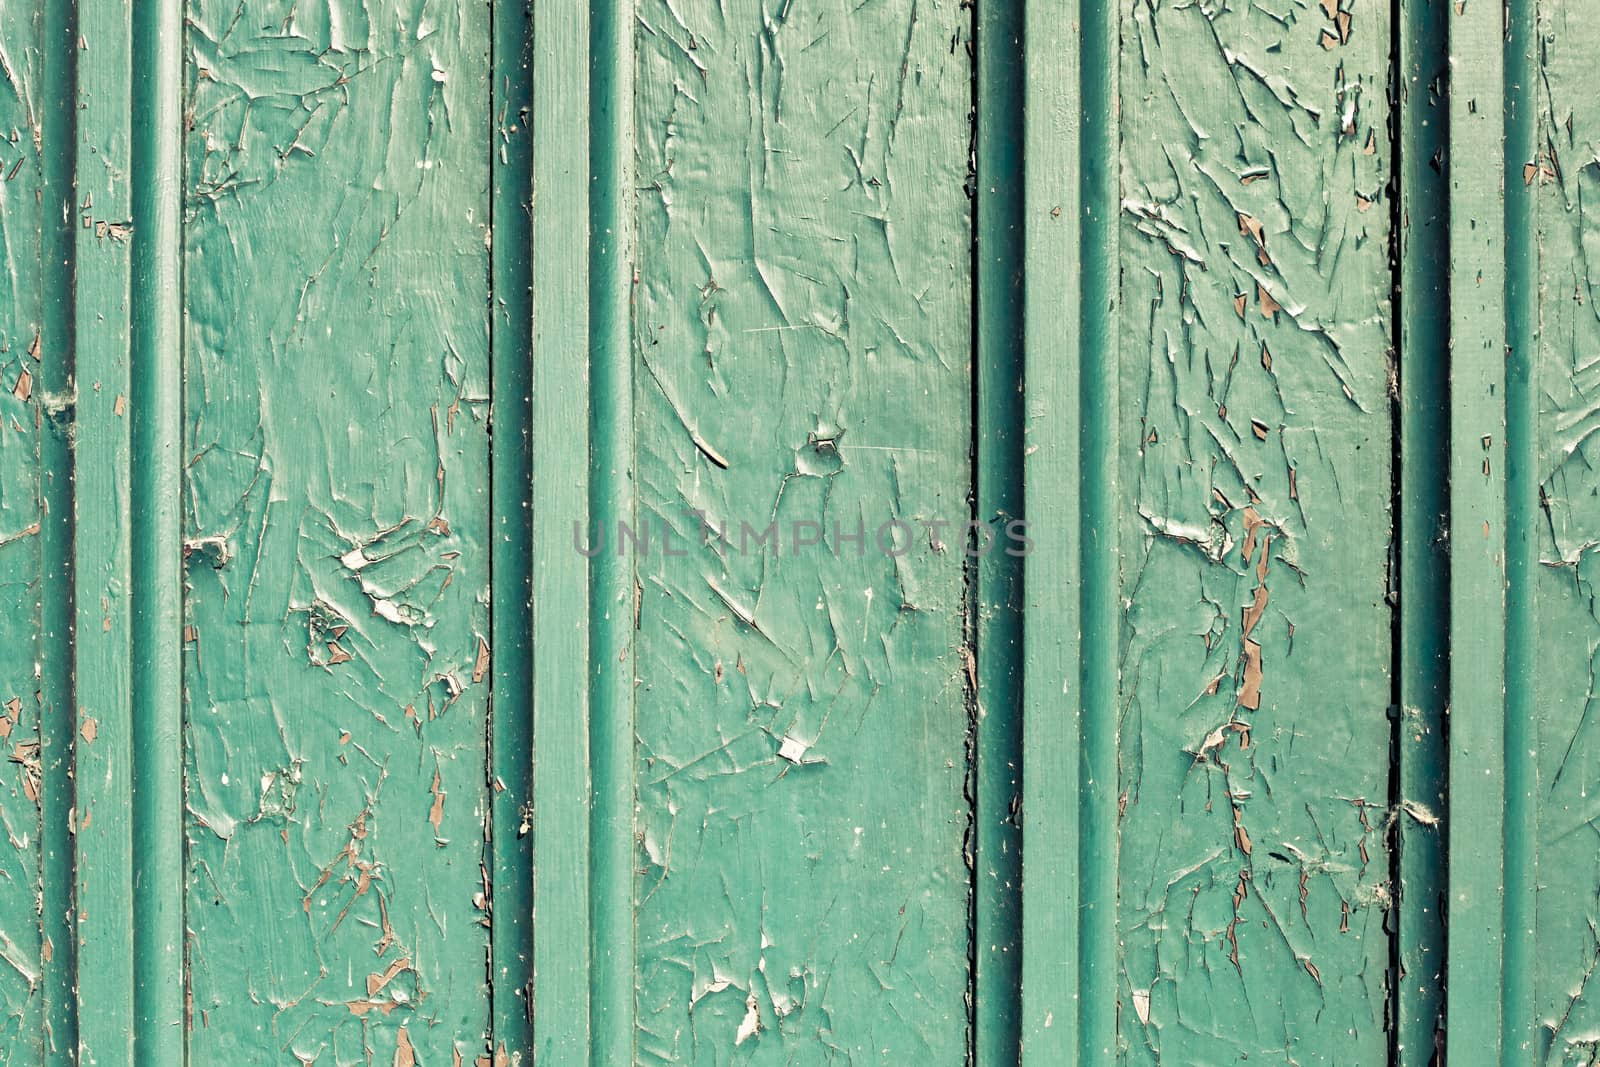 Peeling paint on a wooden surface as a background